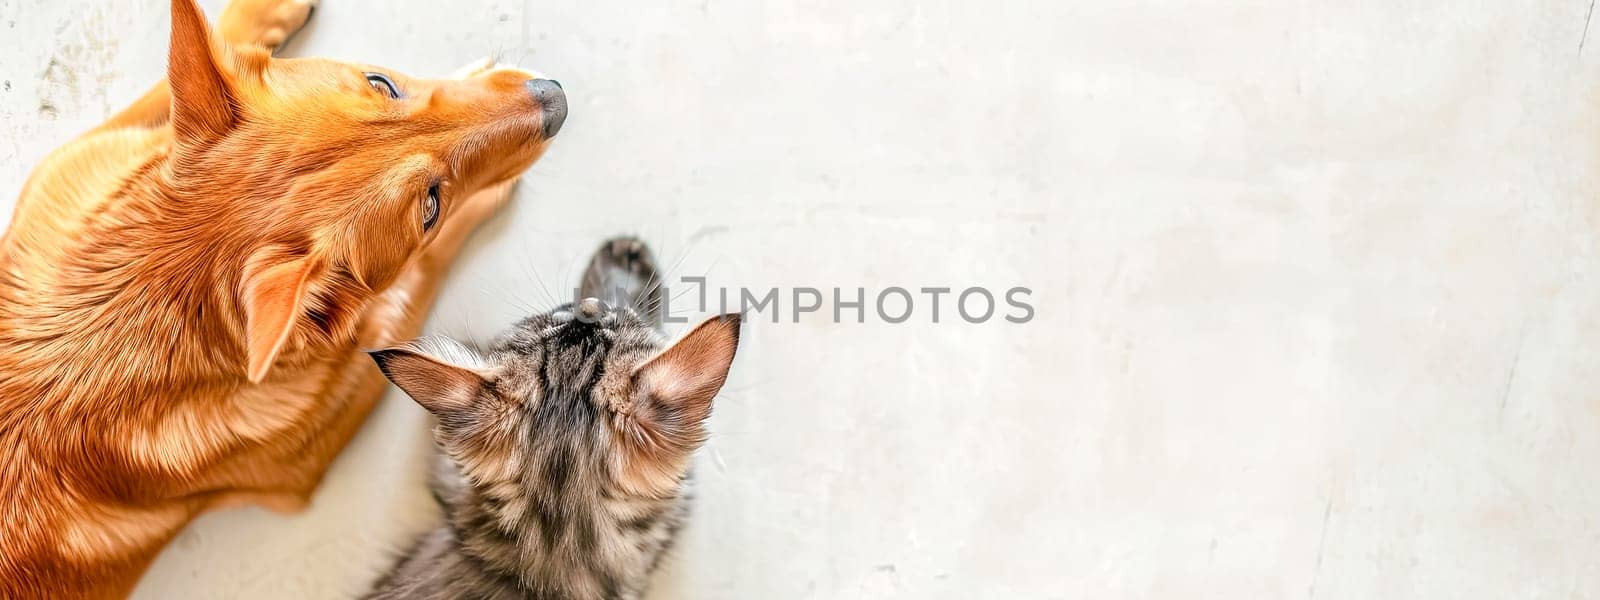 A heartwarming overhead view of a golden dog and a grey tabby cat lying together on a textured white surface, symbolizing friendship between different species, copy space